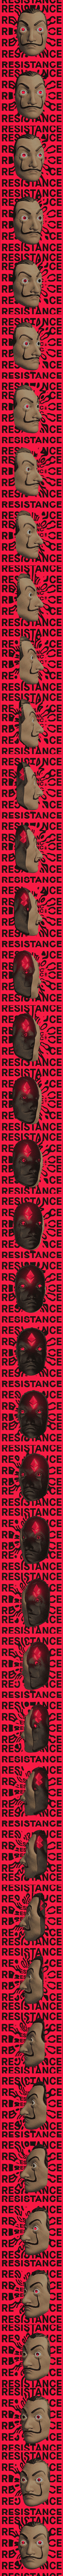 RESISTANCE Club collection image